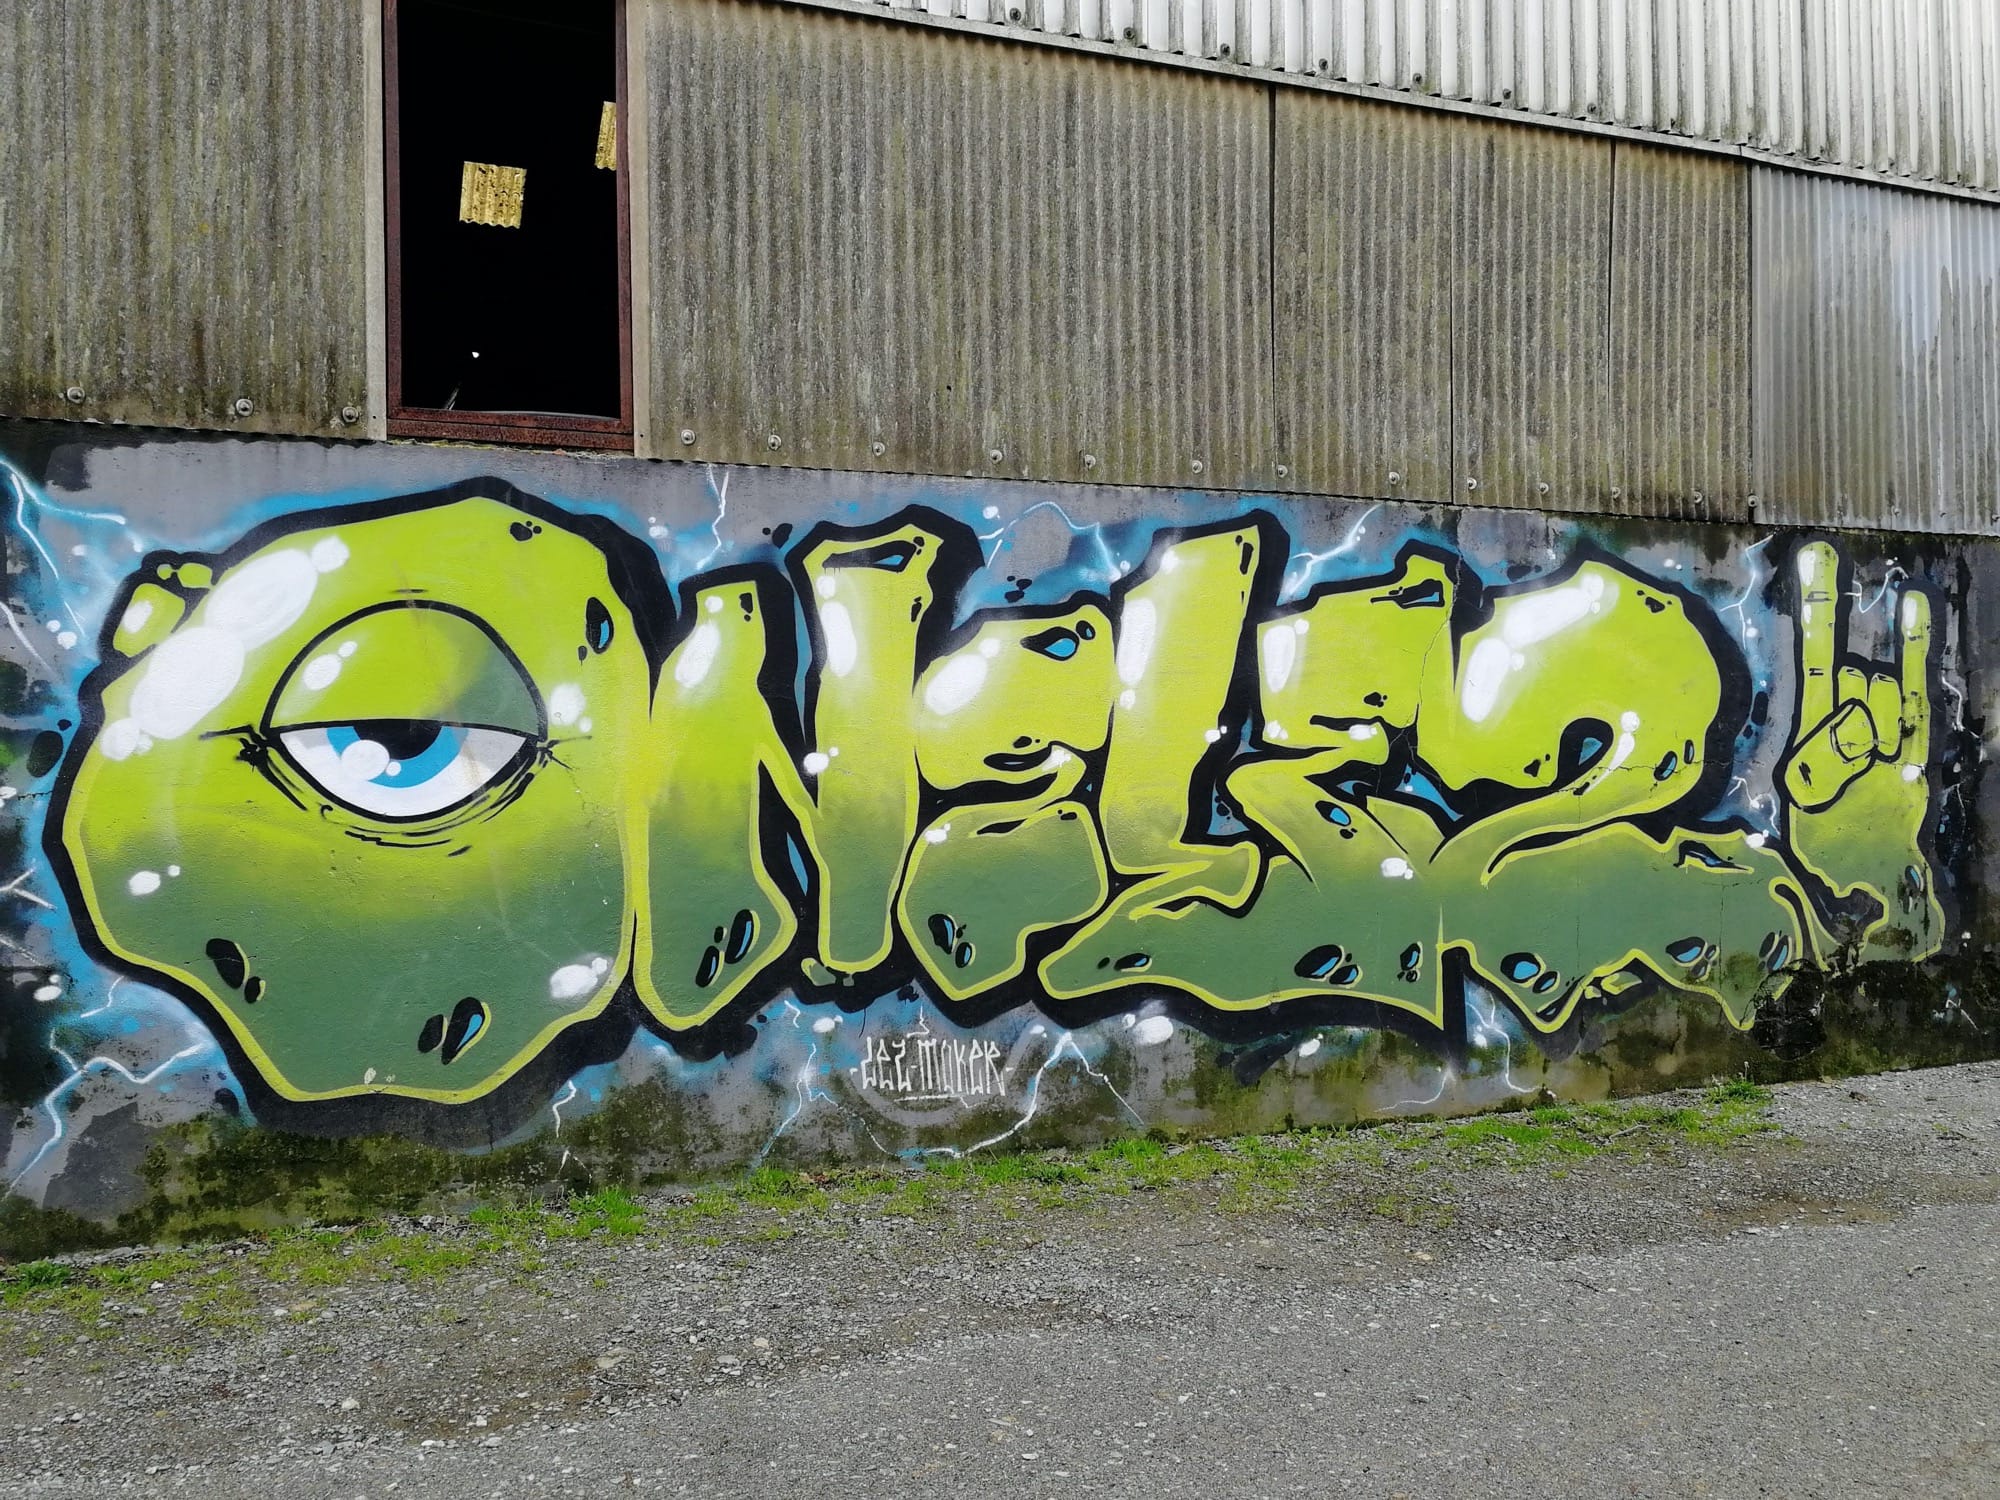 Graffiti 1201  captured by Rabot in Redon France